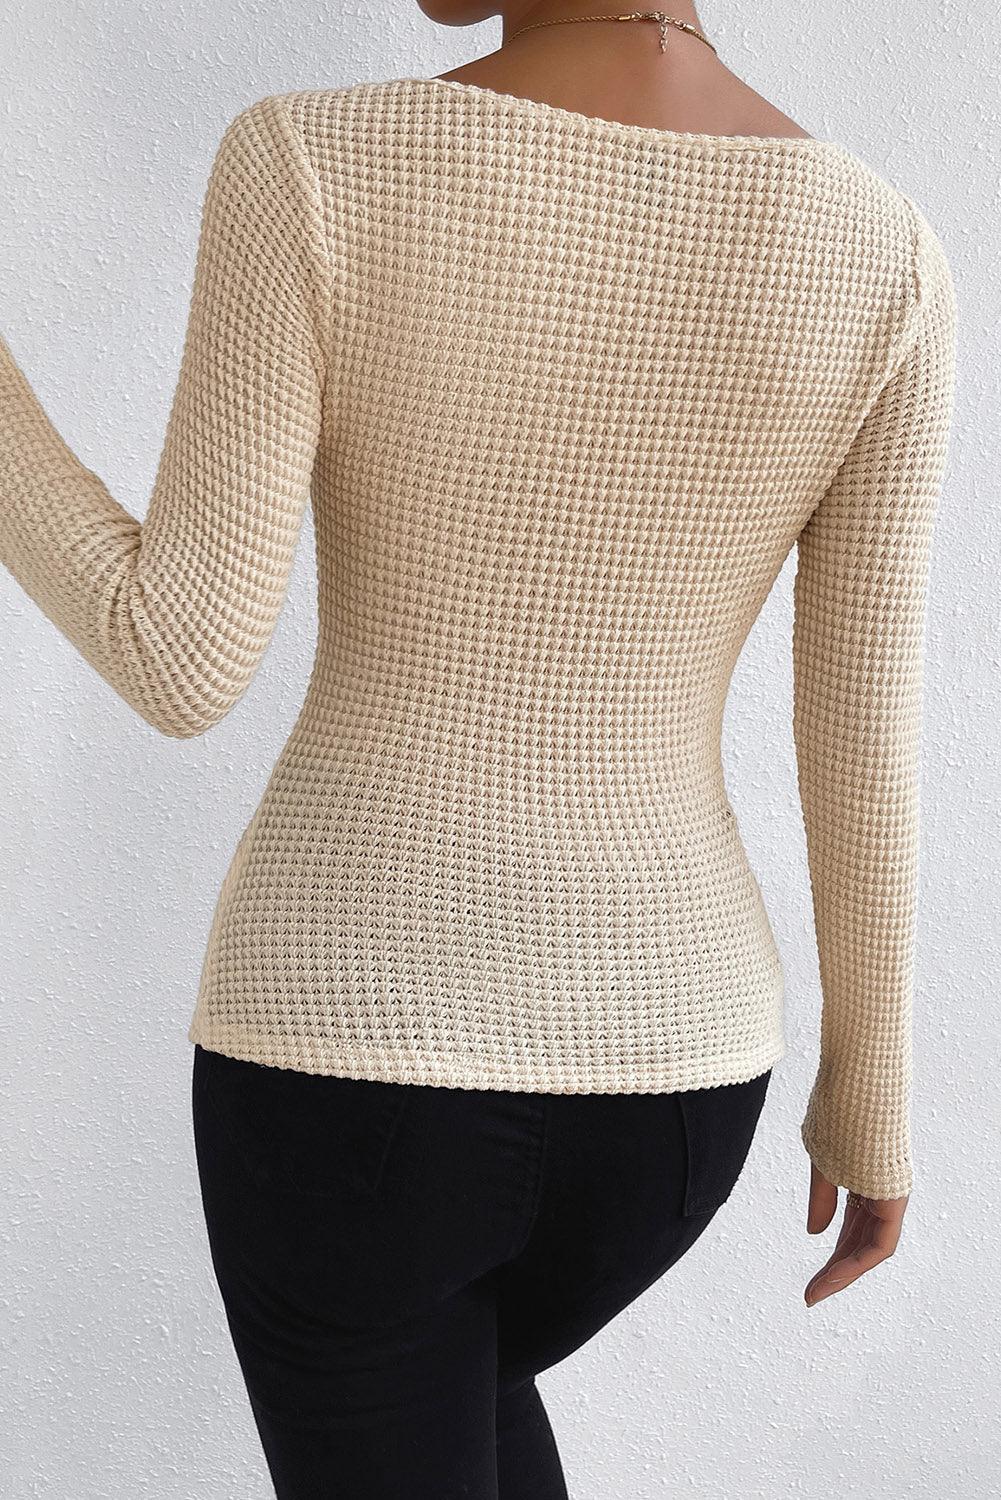 Apricot Square Neck Ruched Textured Knit Top - L & M Kee, LLC